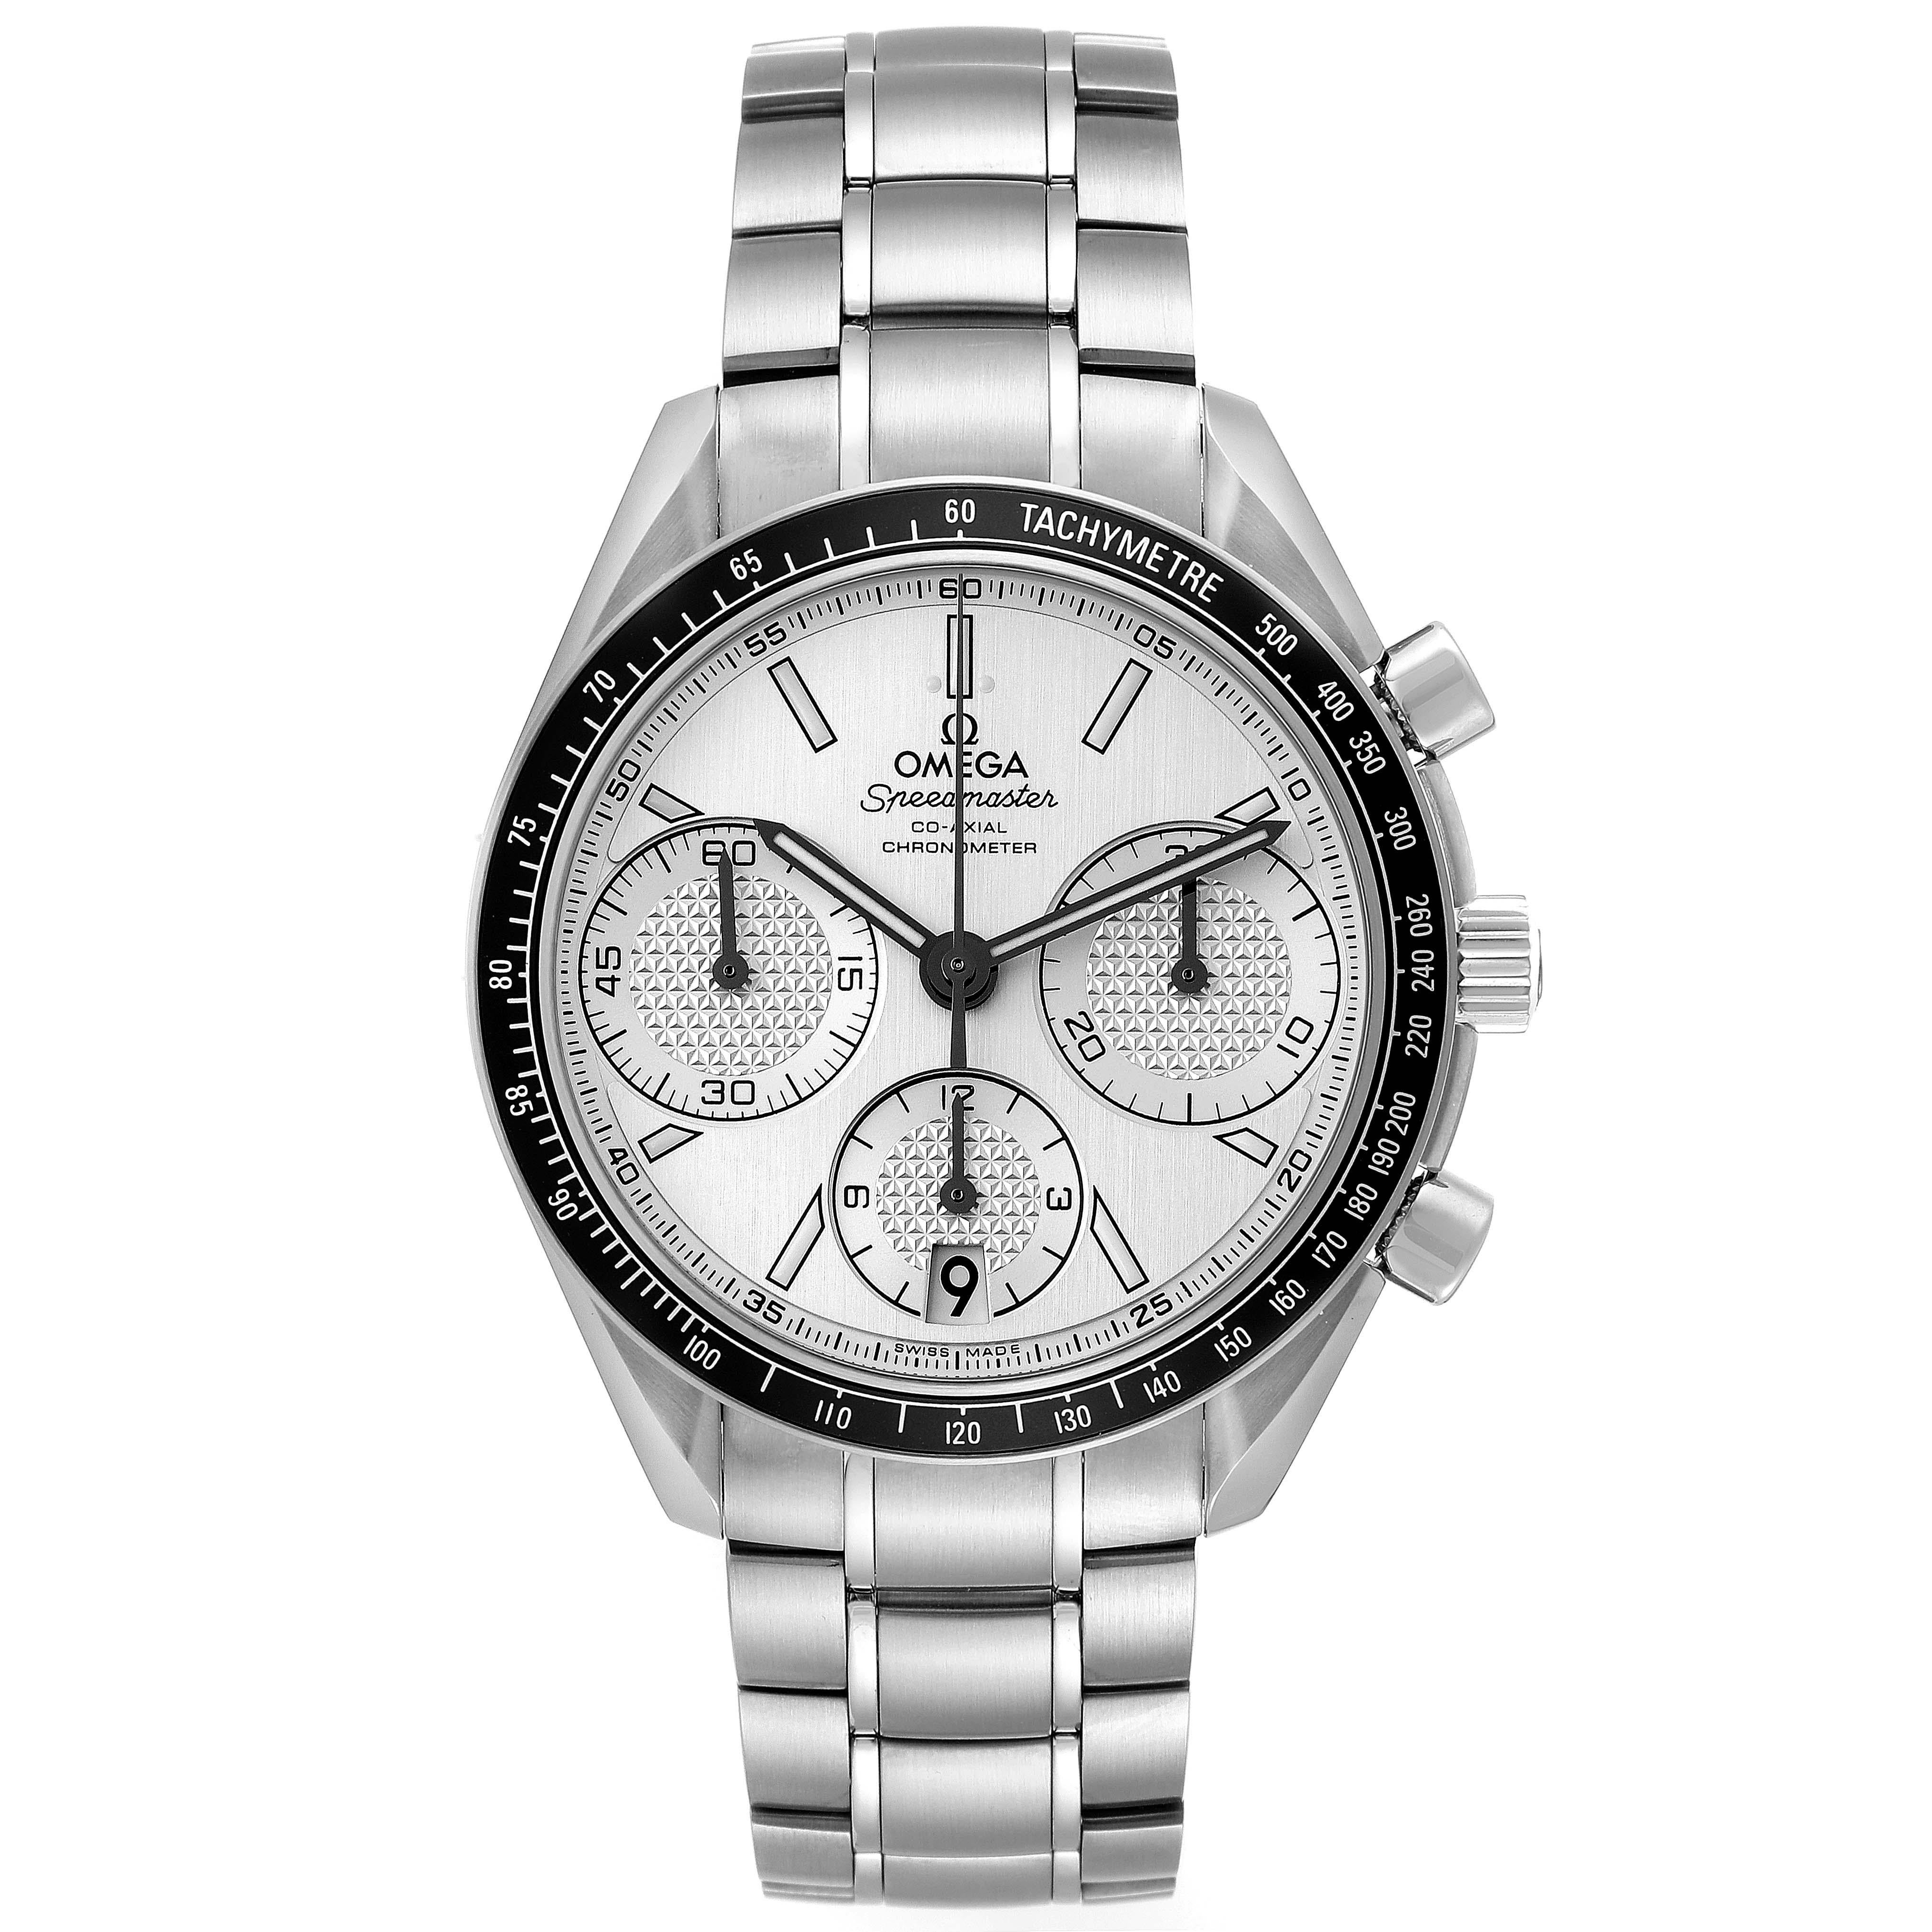 Omega Speedmaster Racing Chrono Steel Mens Watch 326.30.40.50.02.001 Box Card. COSC-certified Omega automatic chronograph movement with a column-wheel mechanism, a Co-Axial Escapement, and a silicon balance spring. Stainless steel round case 40.0 mm